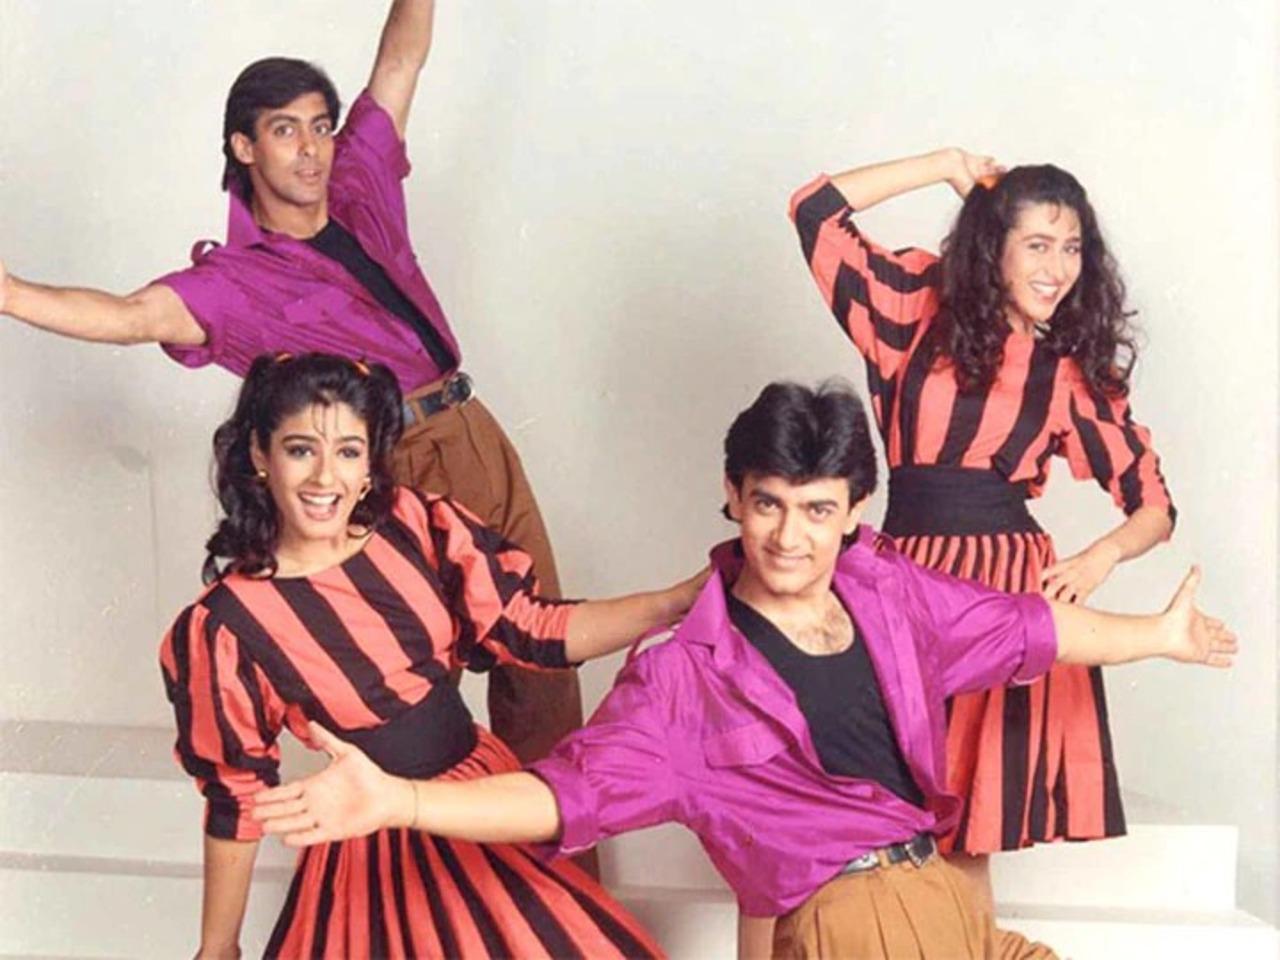 Andaz Apna Apna (1994)
The film was based on the popular comics 'The Archies'. With several anecdotes on friendship and what one would do friends, this makes for a great buddy drama 